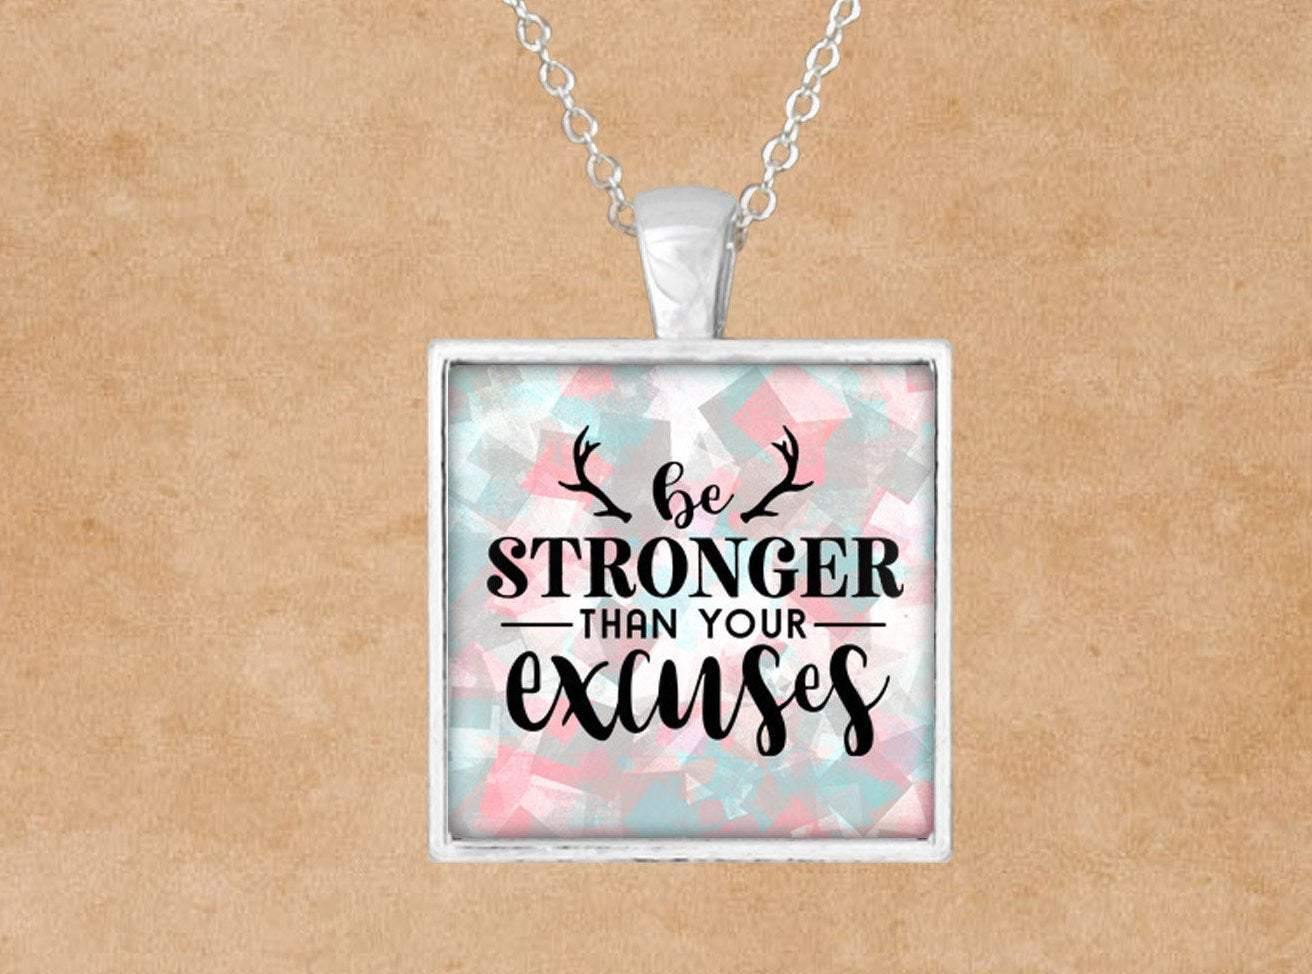 Custom Jewelry | Personalized Jewelry | Pendant Necklace | Be Stronger - This & That Solutions - Custom Jewelry | Personalized Jewelry | Pendant Necklace | Be Stronger - Personalized Gifts & Custom Home Decor